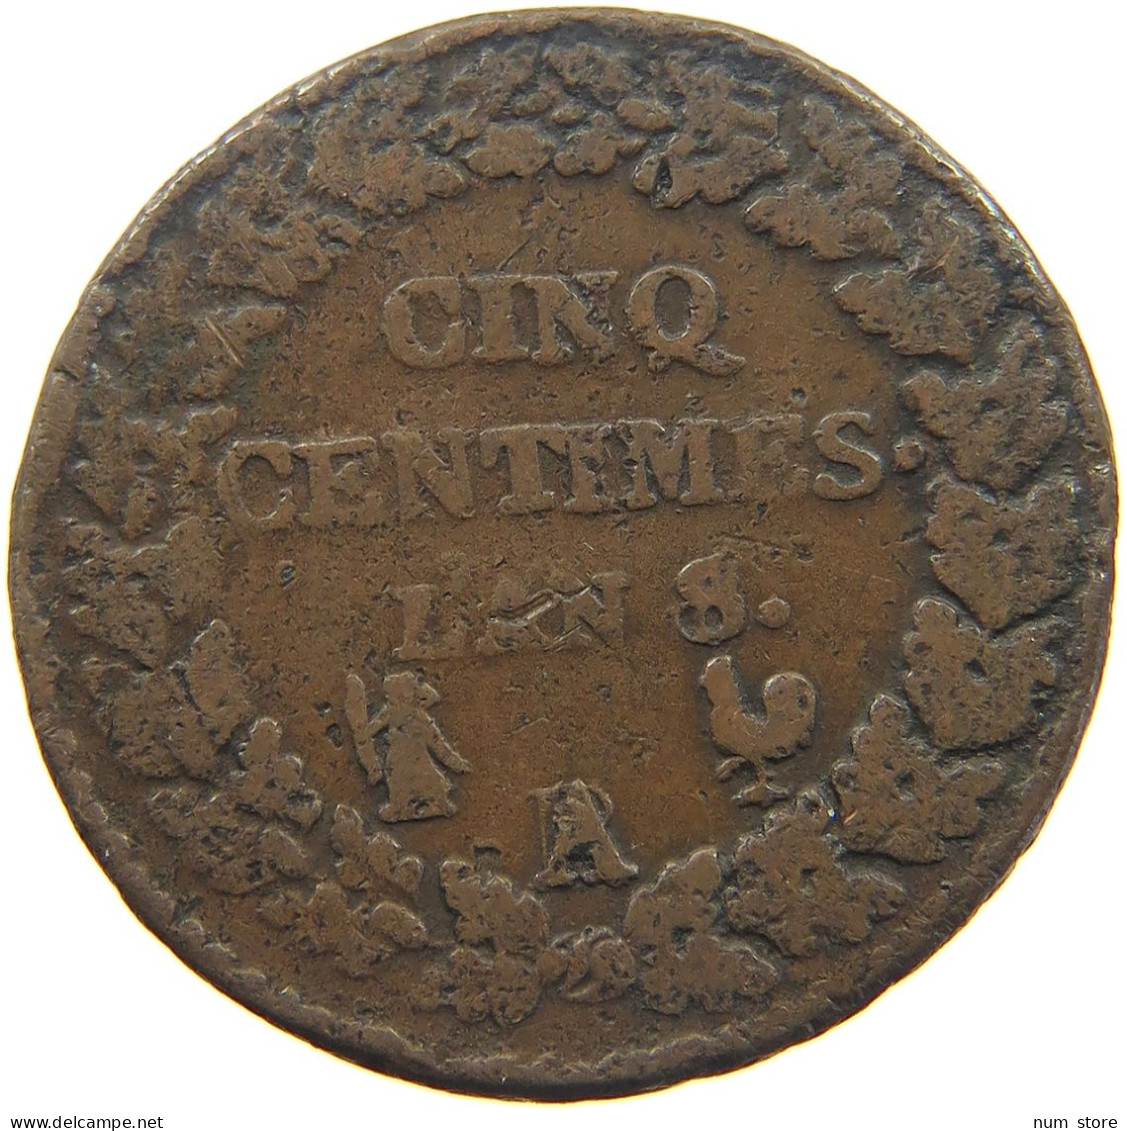 FRANCE 5 CENTIMES L'AN 8 A OVER B 5 CENTIES LAN 8 A OVER B #t001 0103 - 5 Centimes